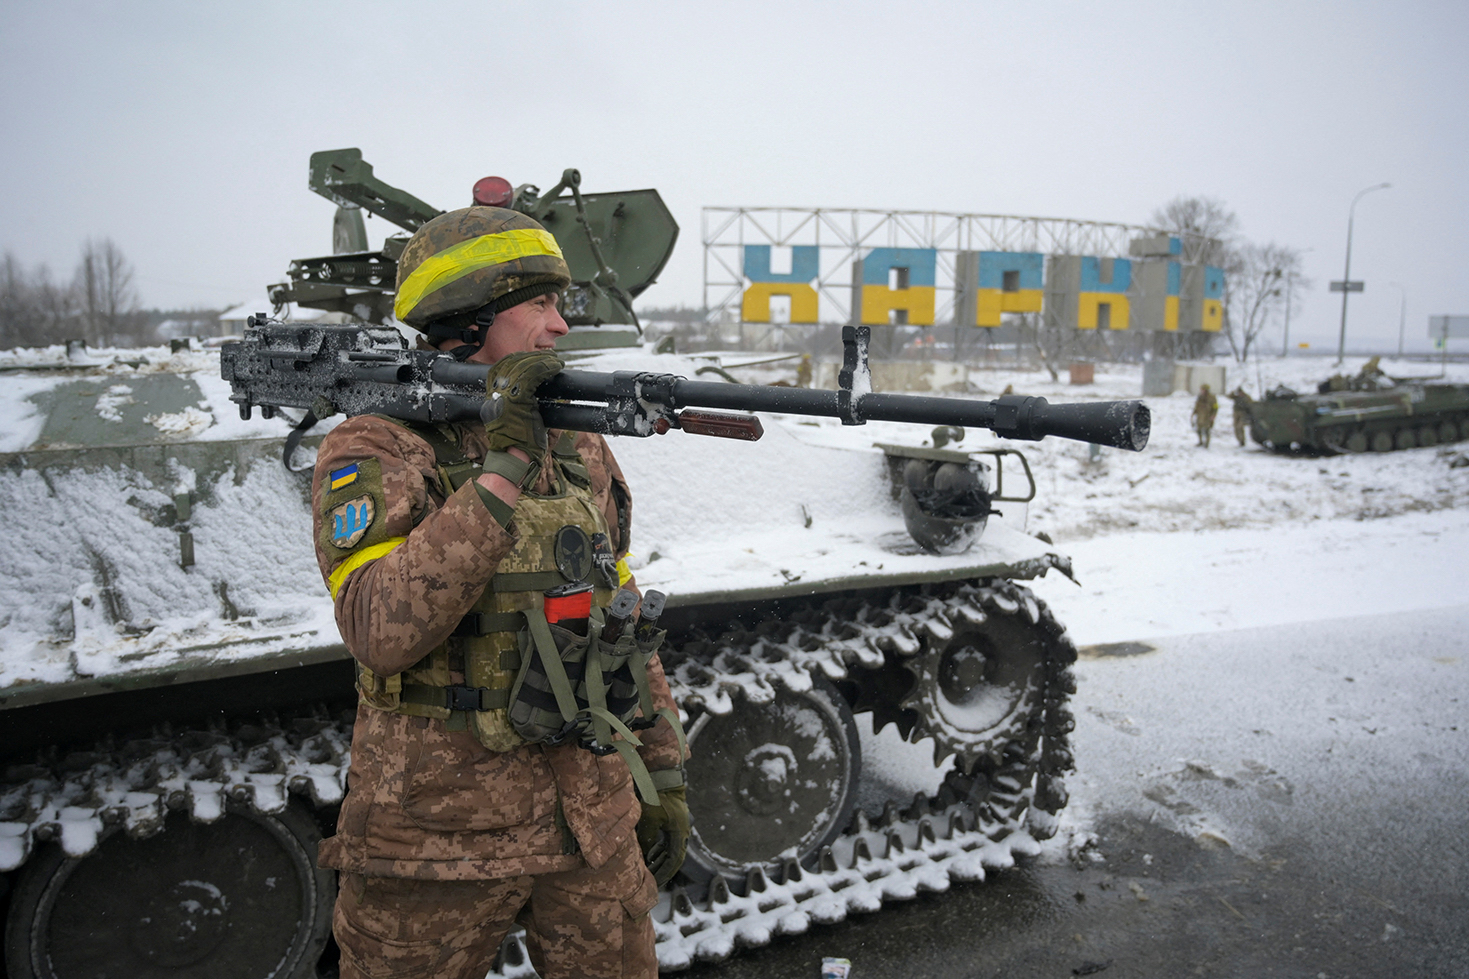 A Ukrainian serviceman reacts while holding a weapon in Kharkiv, Ukraine, on February 25, 2022. 